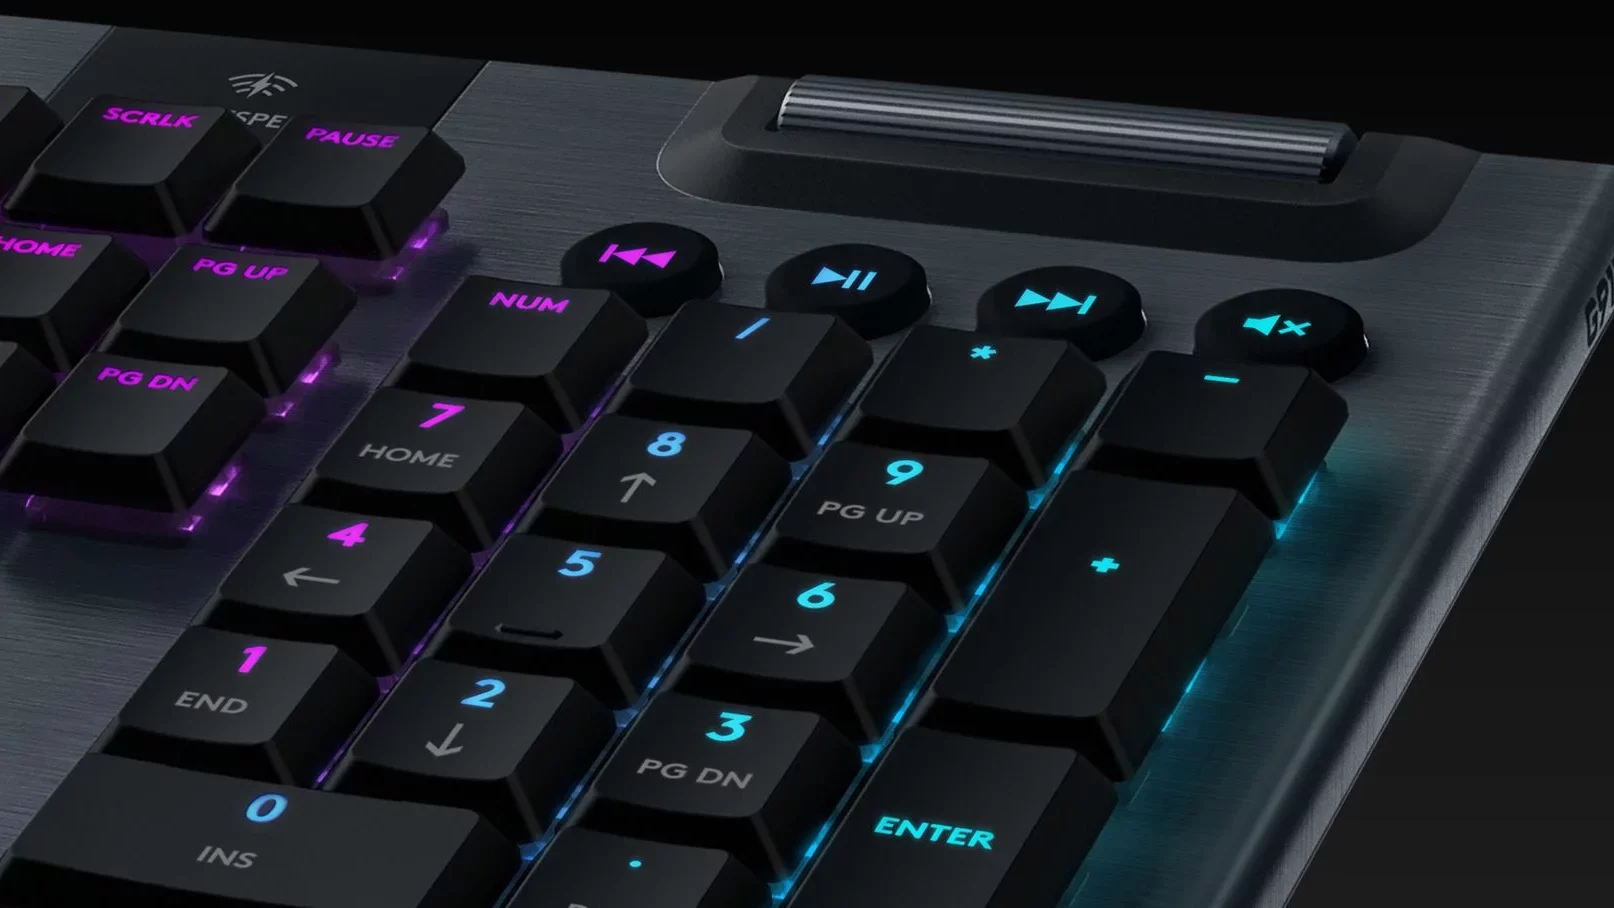 Logitech G915 vs G915 TKL: What's the difference?